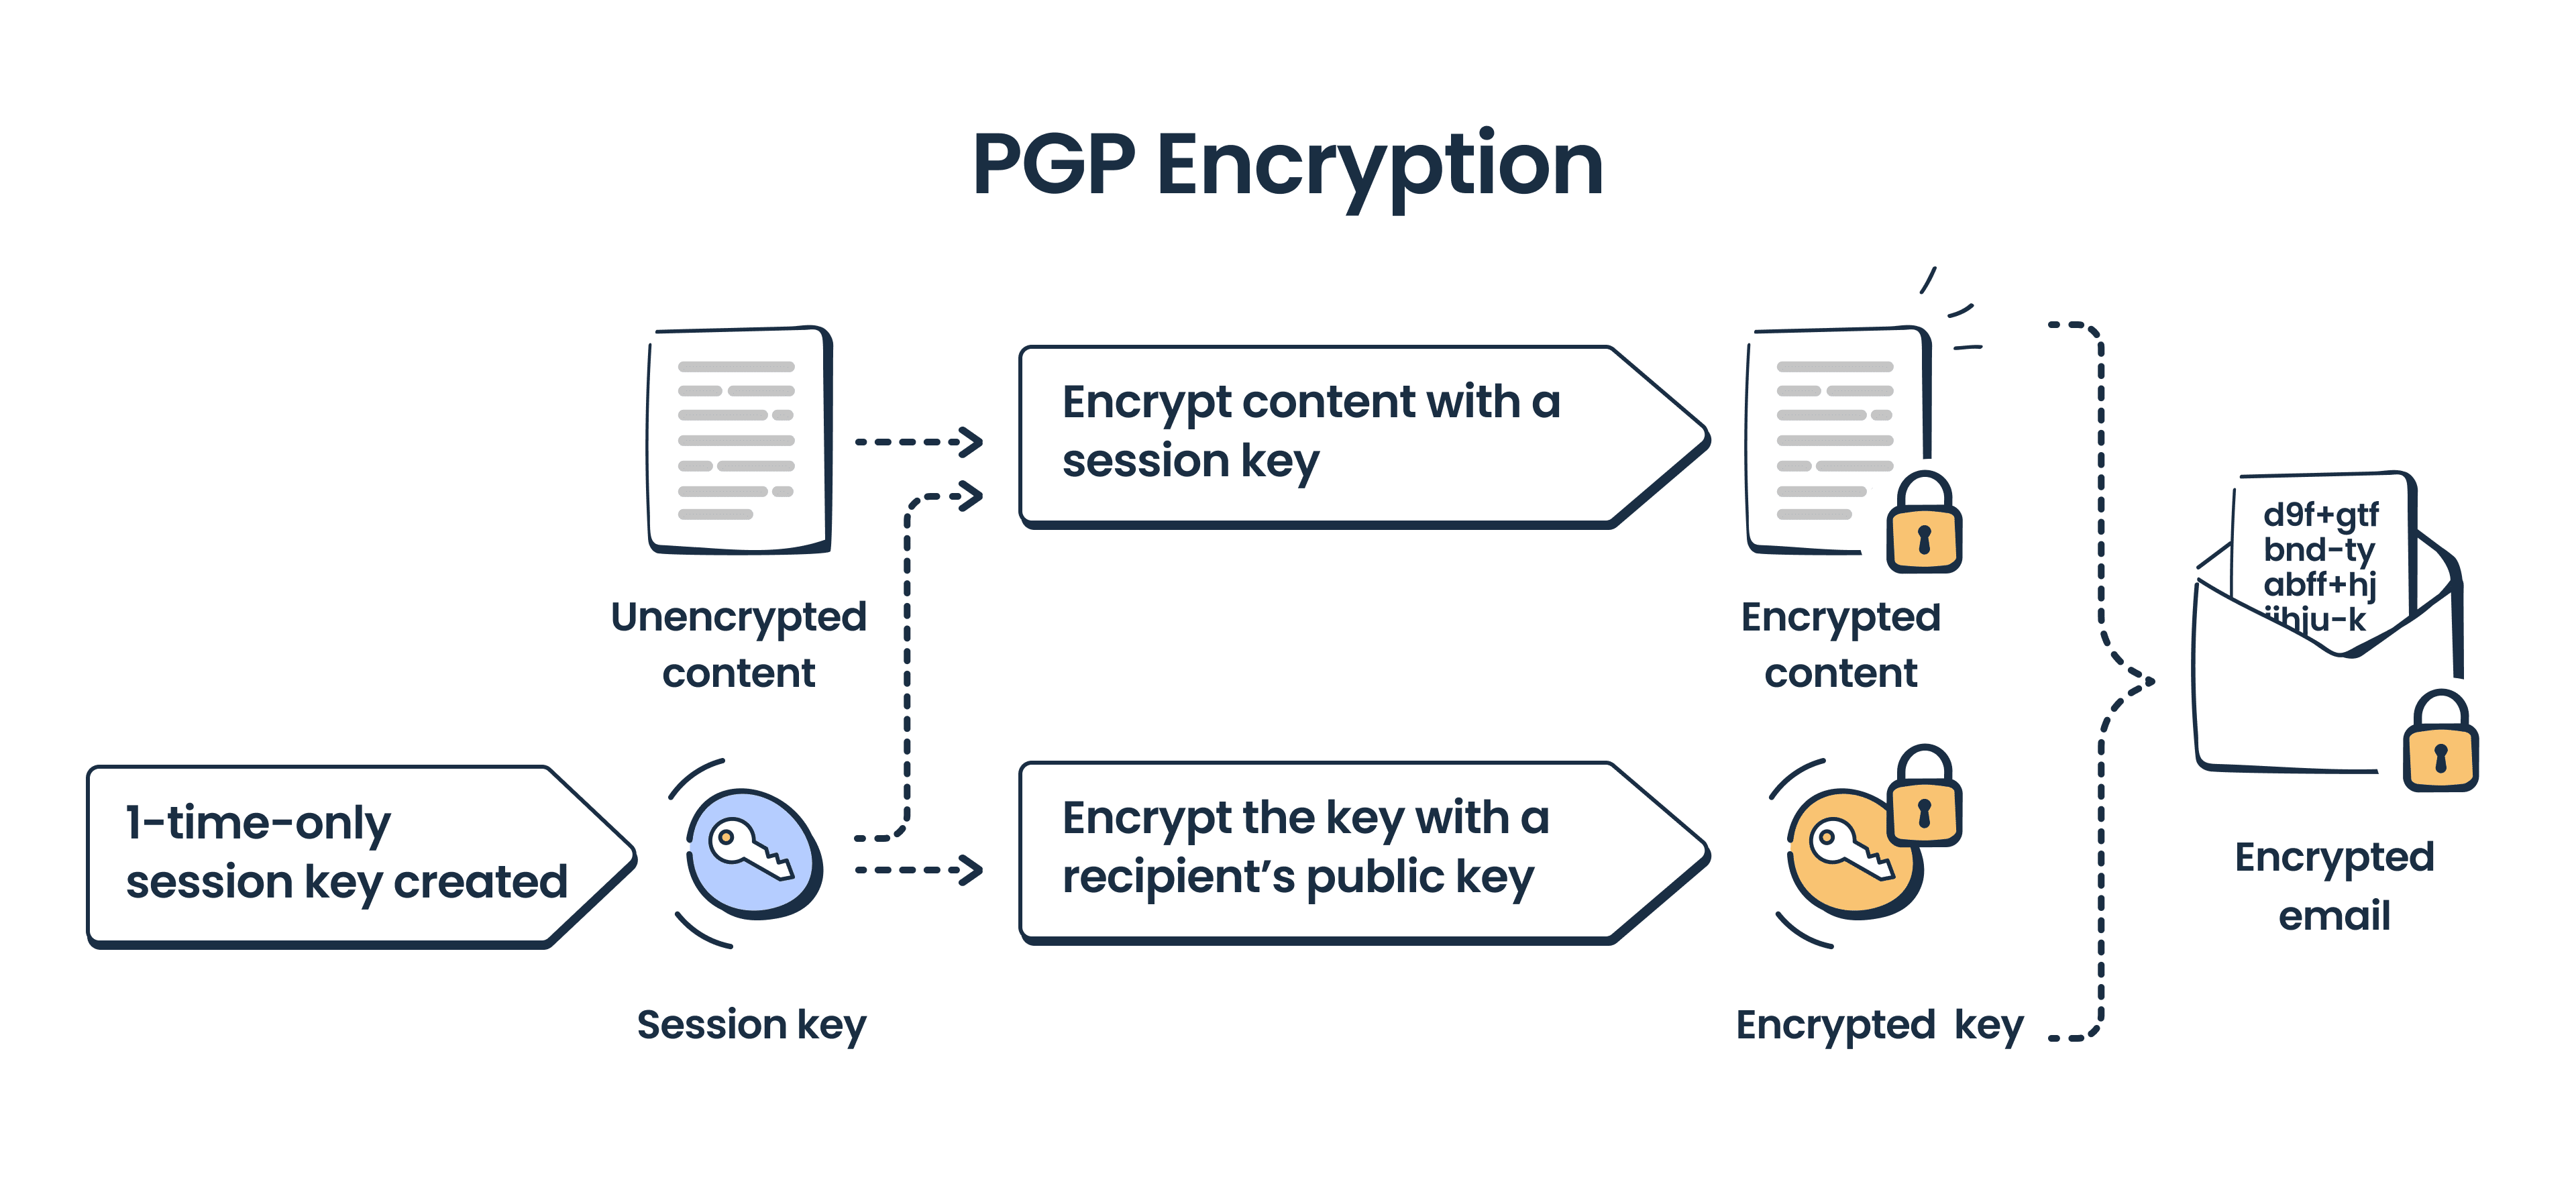 PGP encryption explained